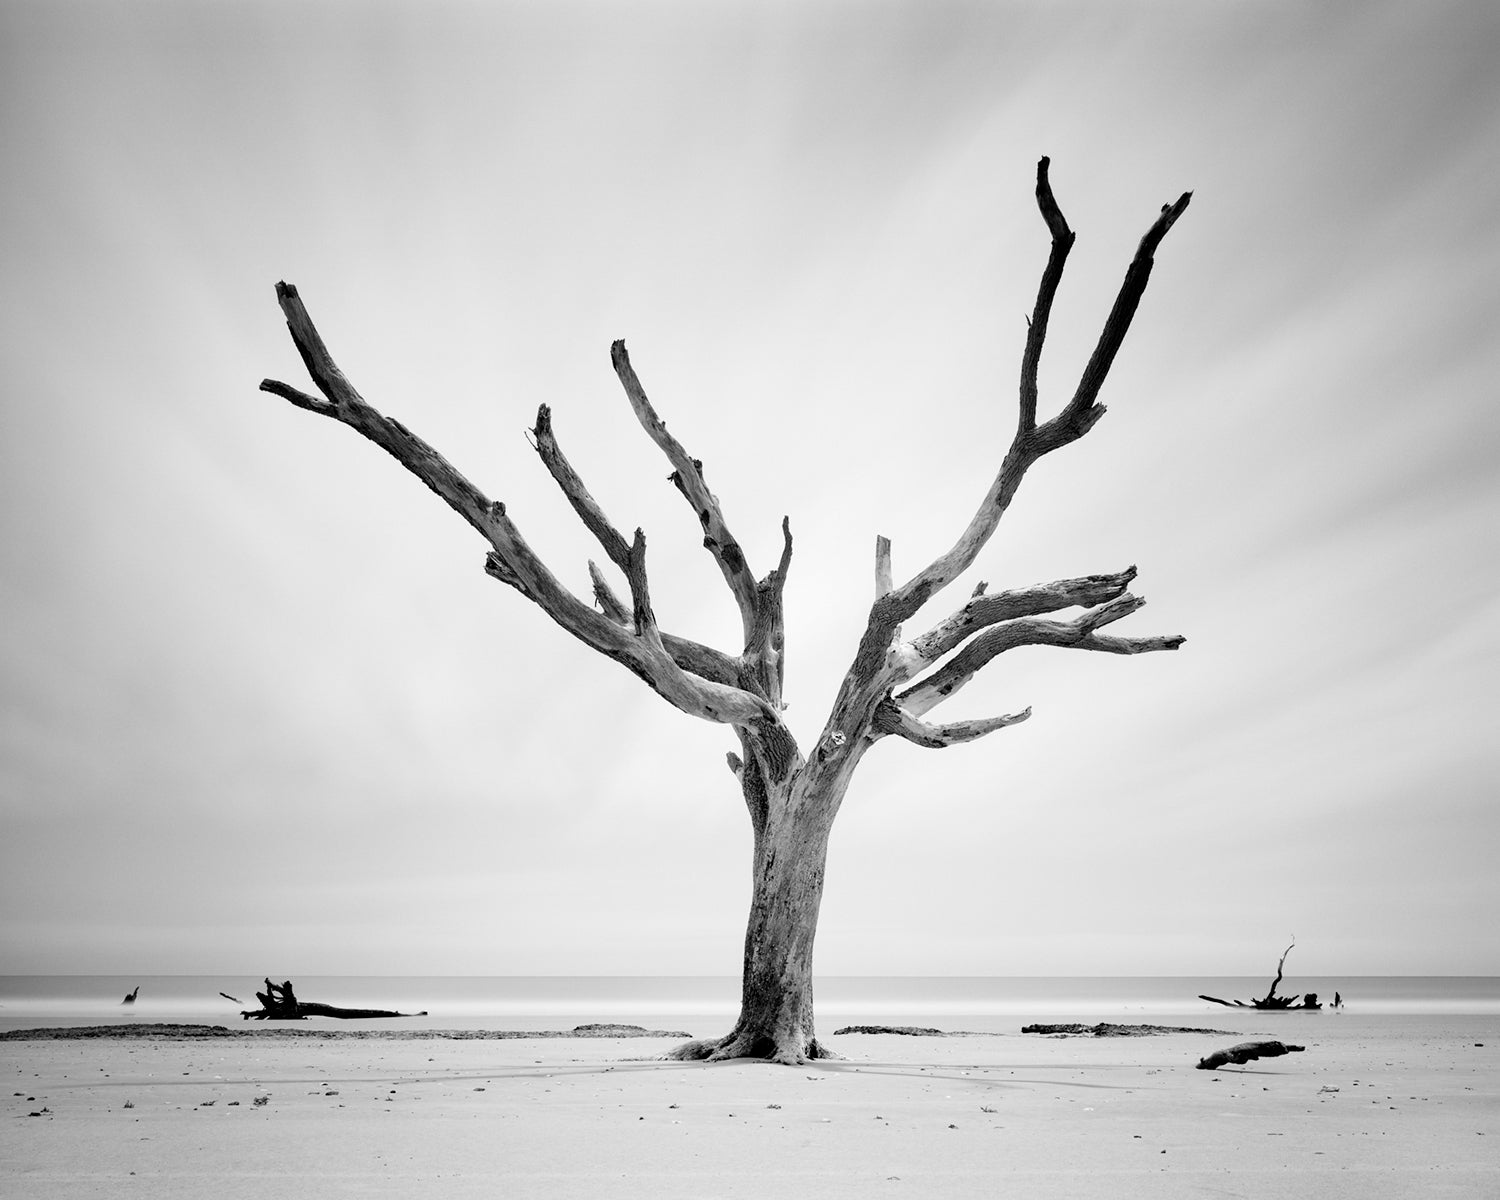 Film photo taken by Mike Basher of a tree at Hunting Island